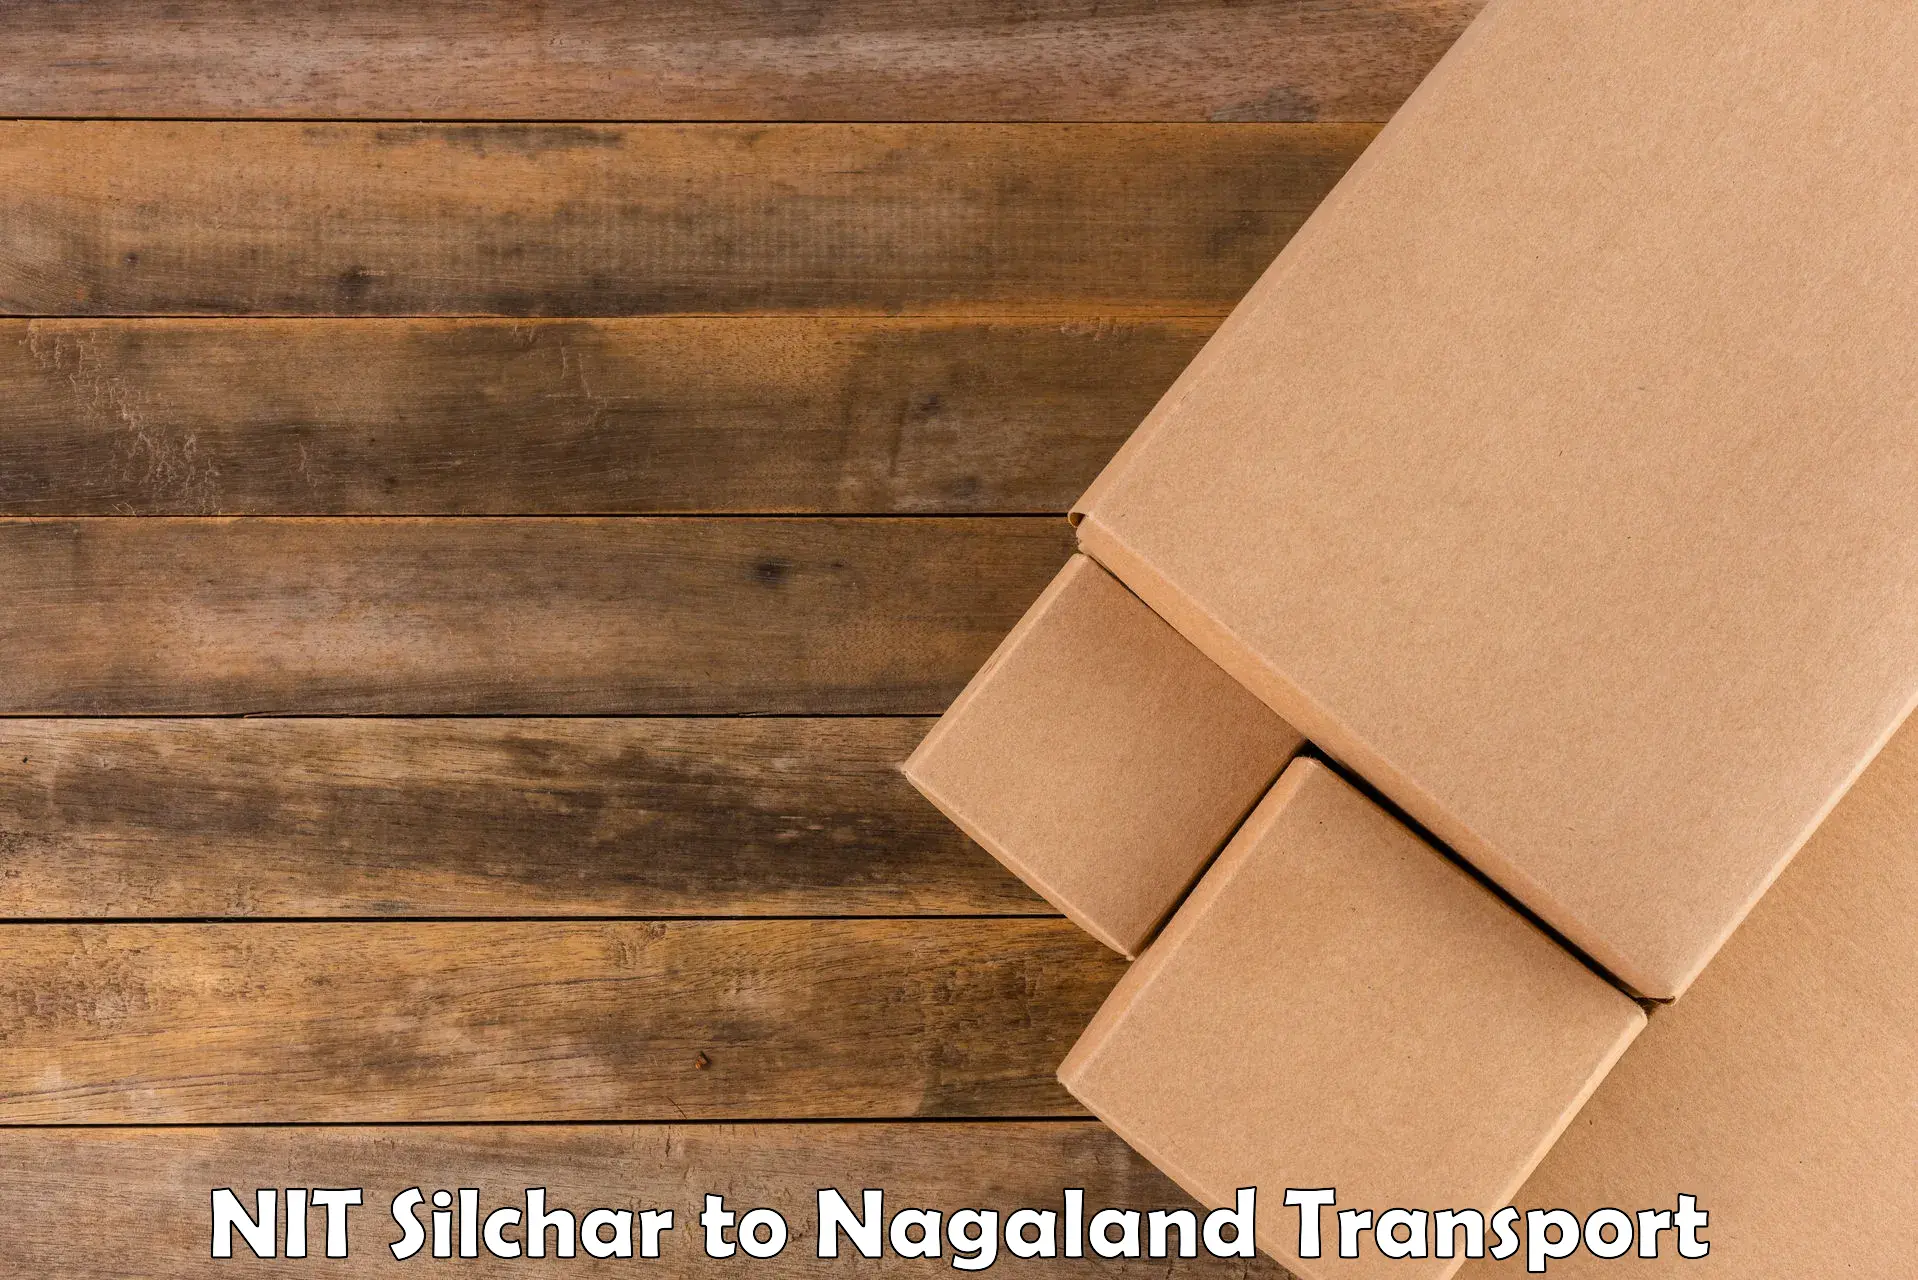 Lorry transport service NIT Silchar to Nagaland